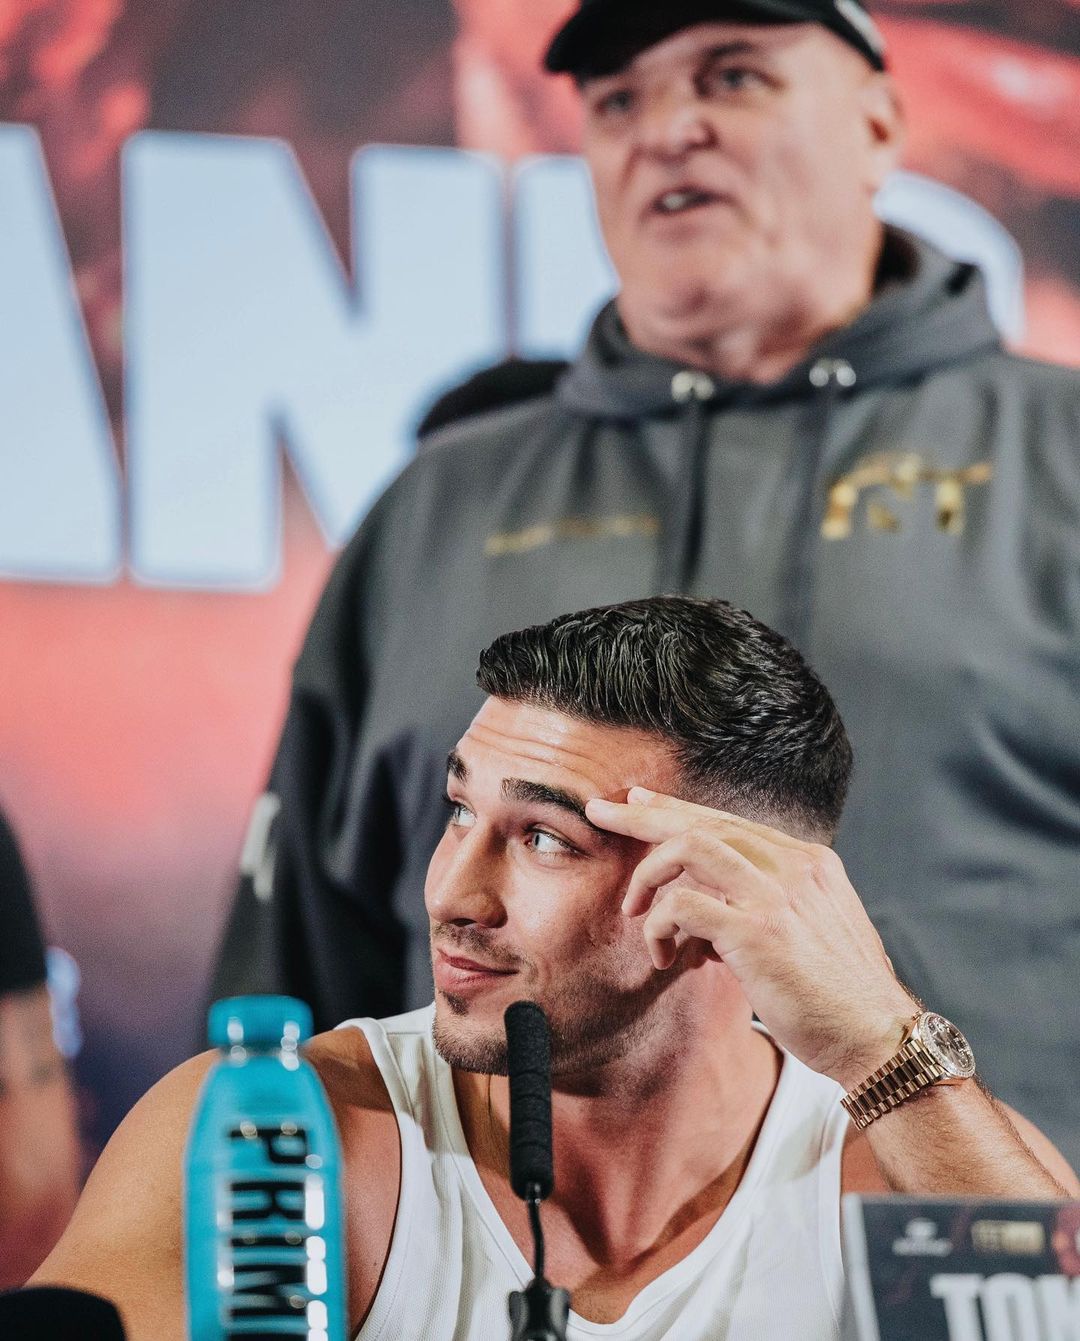 Tommy Fury, the English boxing sensation, is turning heads not just for his powerful punches but also for his impeccable sense of style. He's proudly flaunting a 40mm Rolex Day-Date "Chocolate," a timepiece that's as bold and unforgettable as his knockout performances in the ring.